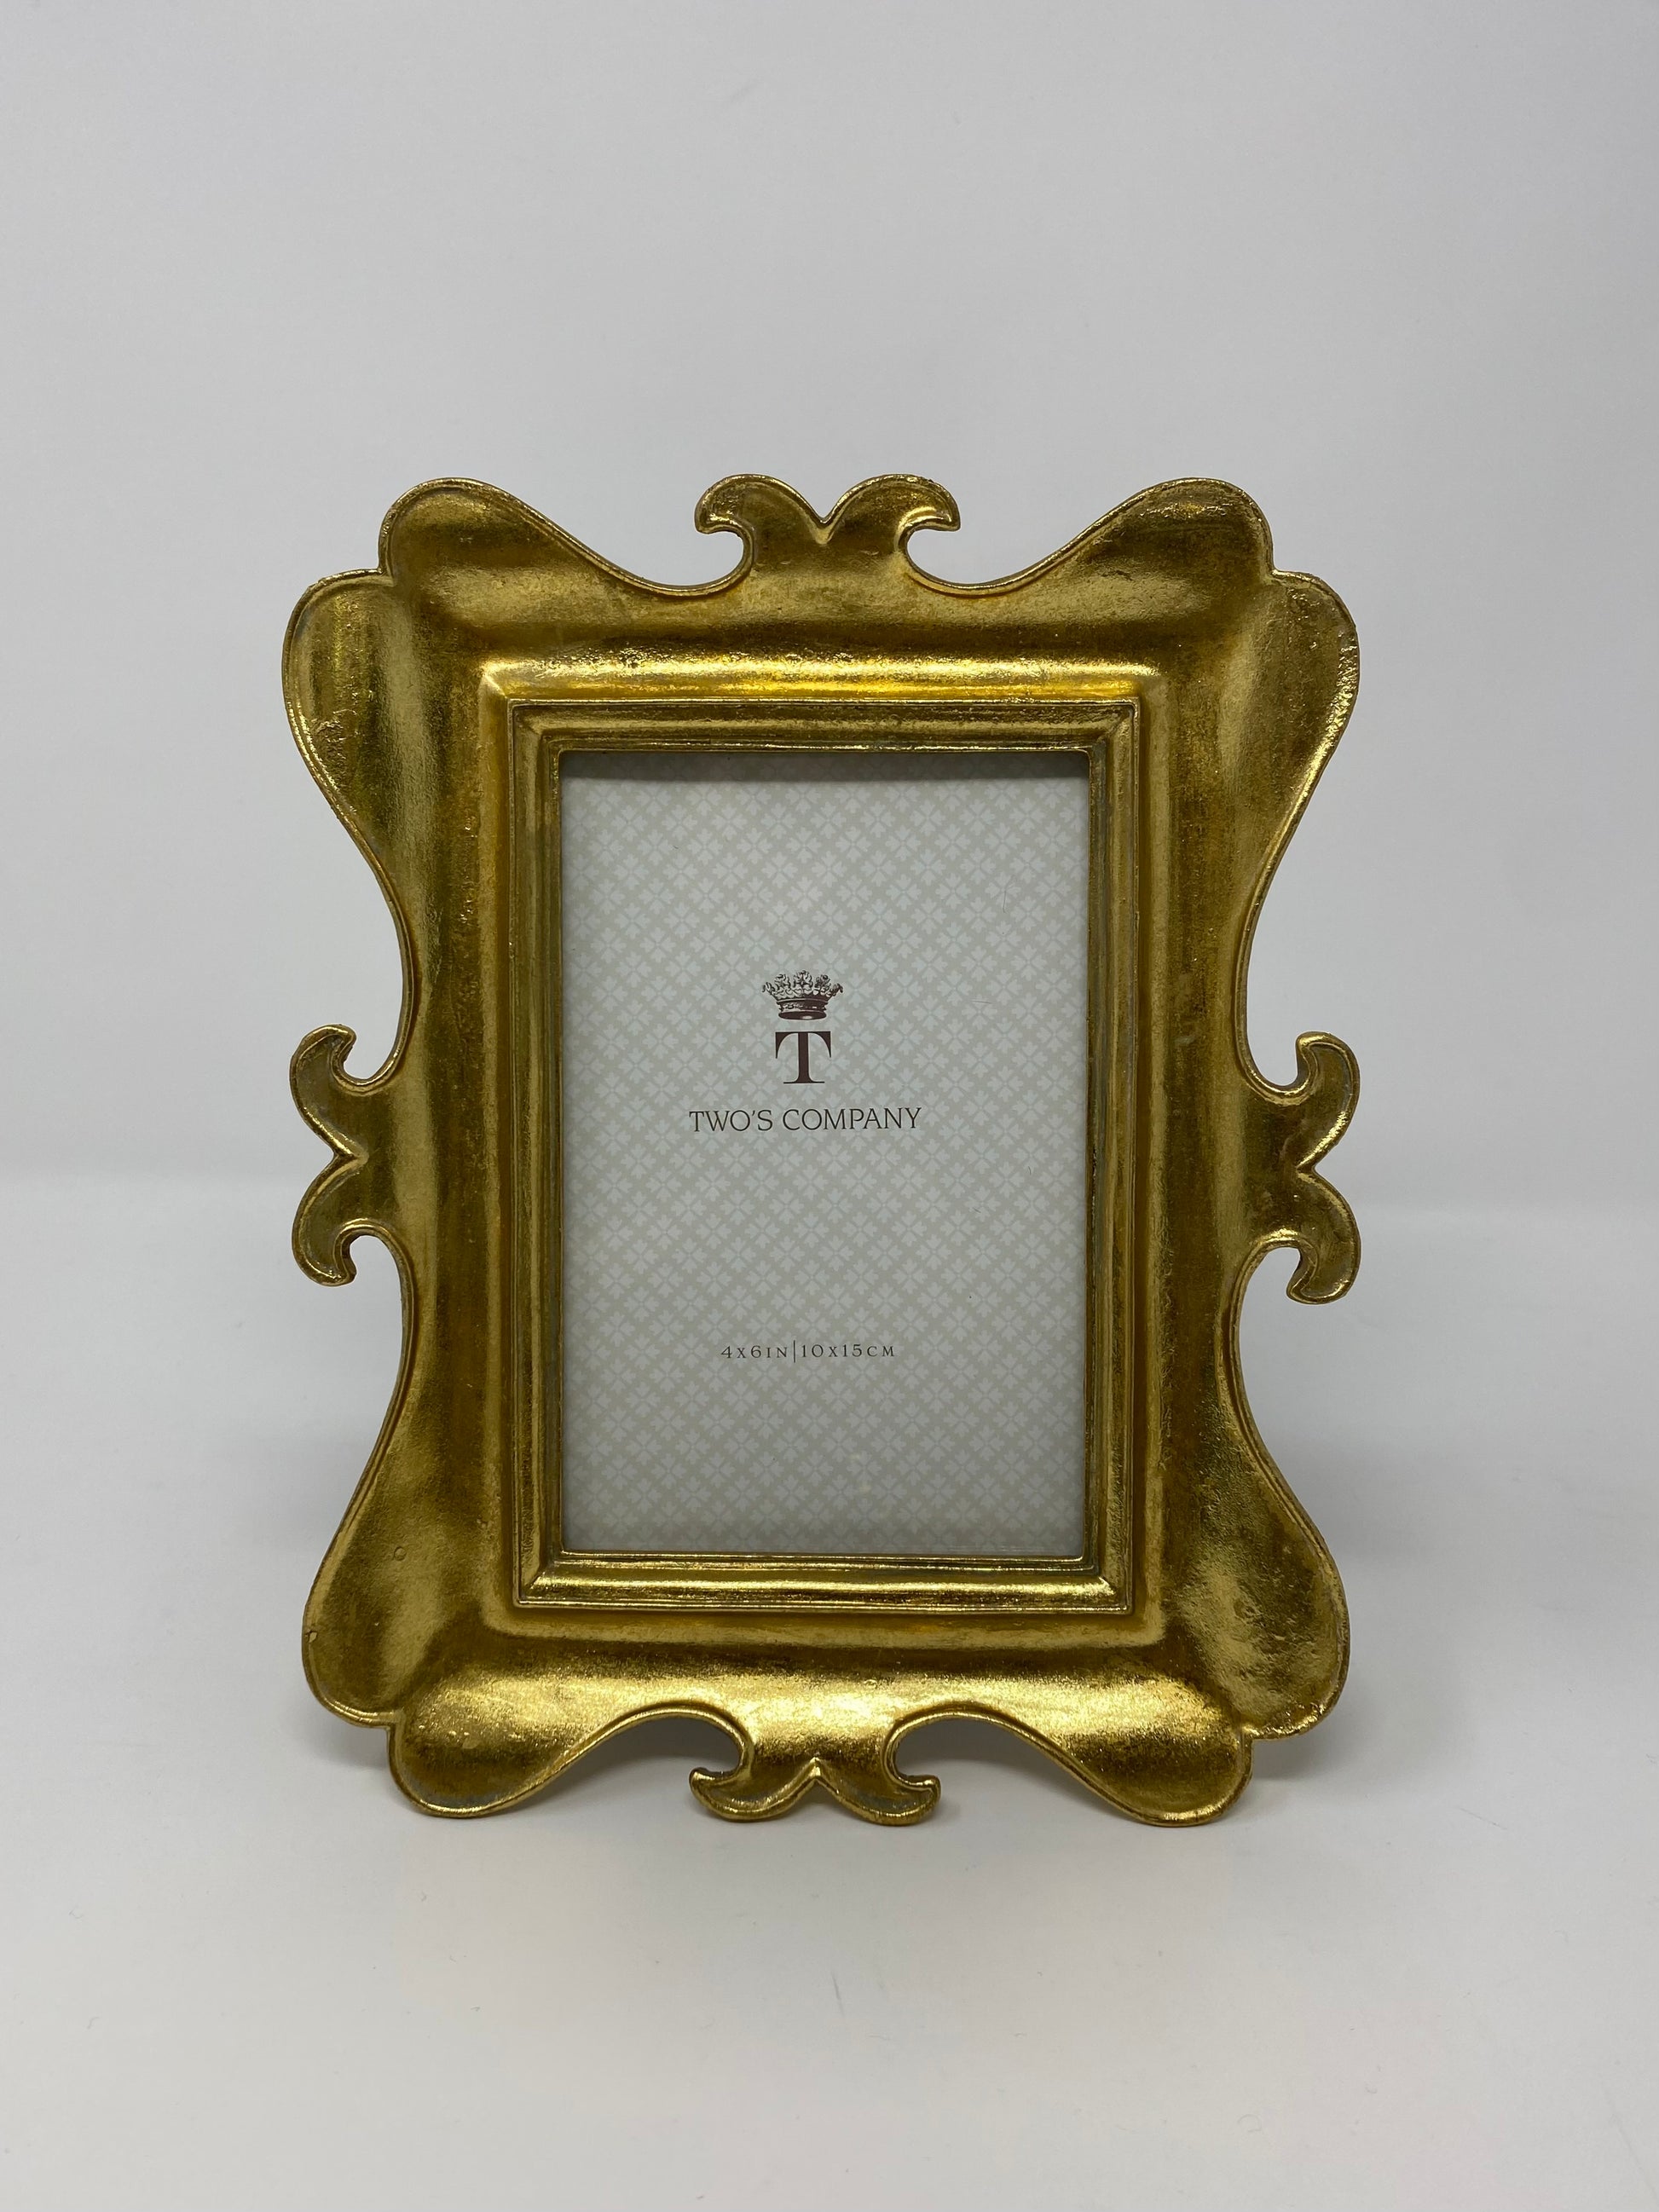 Gold Leaf Rounded w/ Accents Photo Frame - 4x6 Home Decor Two's Company   